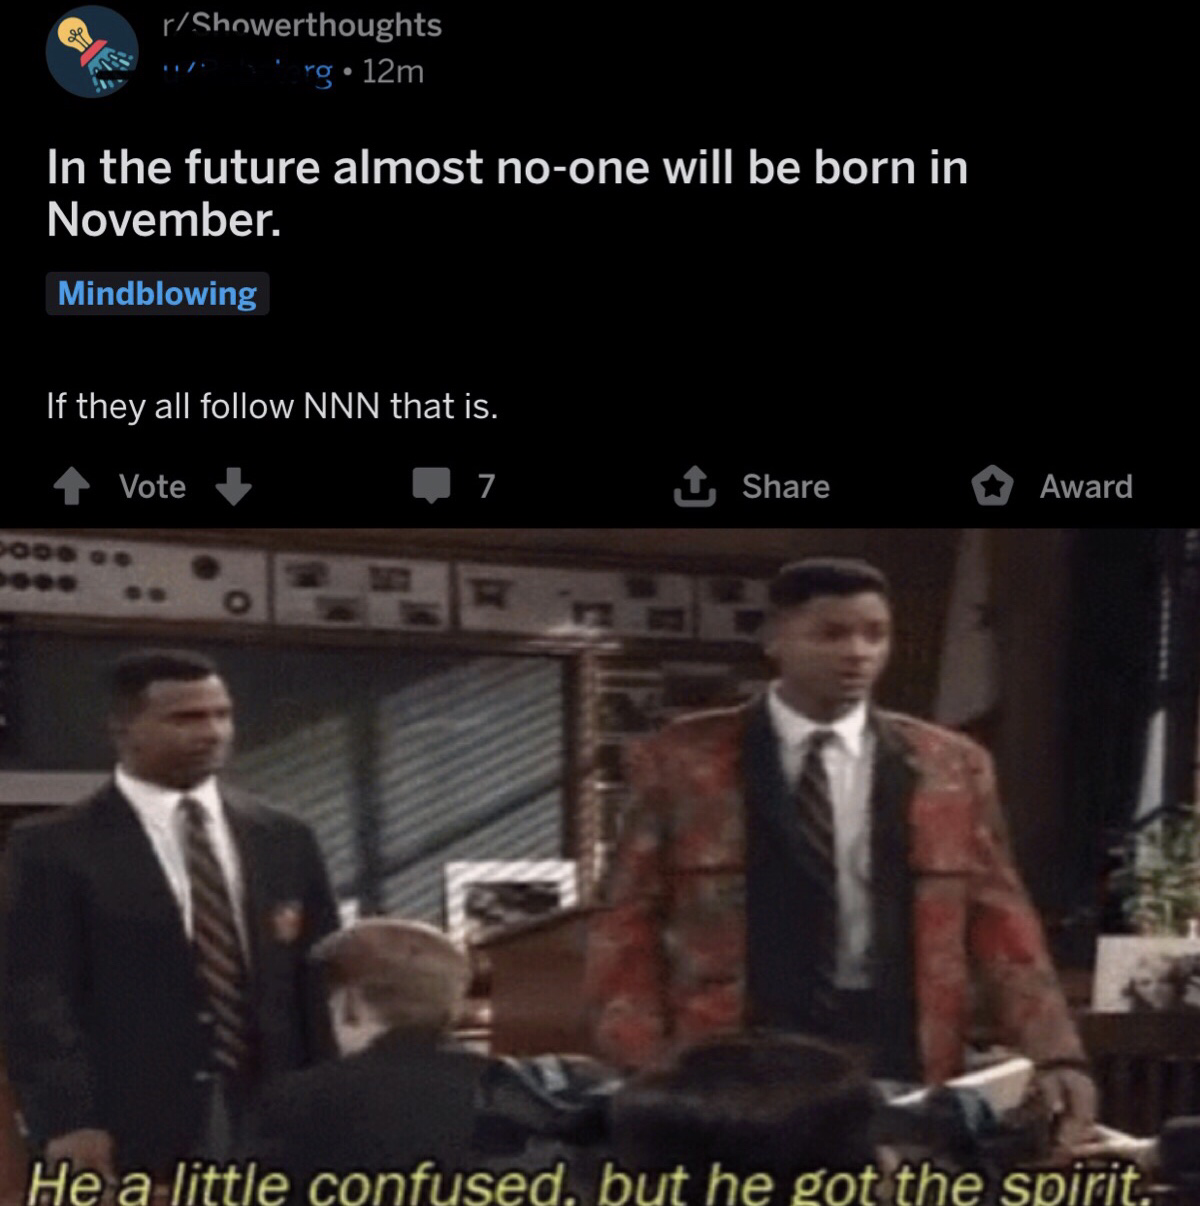 he's got the spirit meme - 6 Showerthoughts . og 12m In the future almost noone will be born in November. Mindblowing If they all Nnn that is. Vote 17 1 Award He a little confused, but he got the spirit